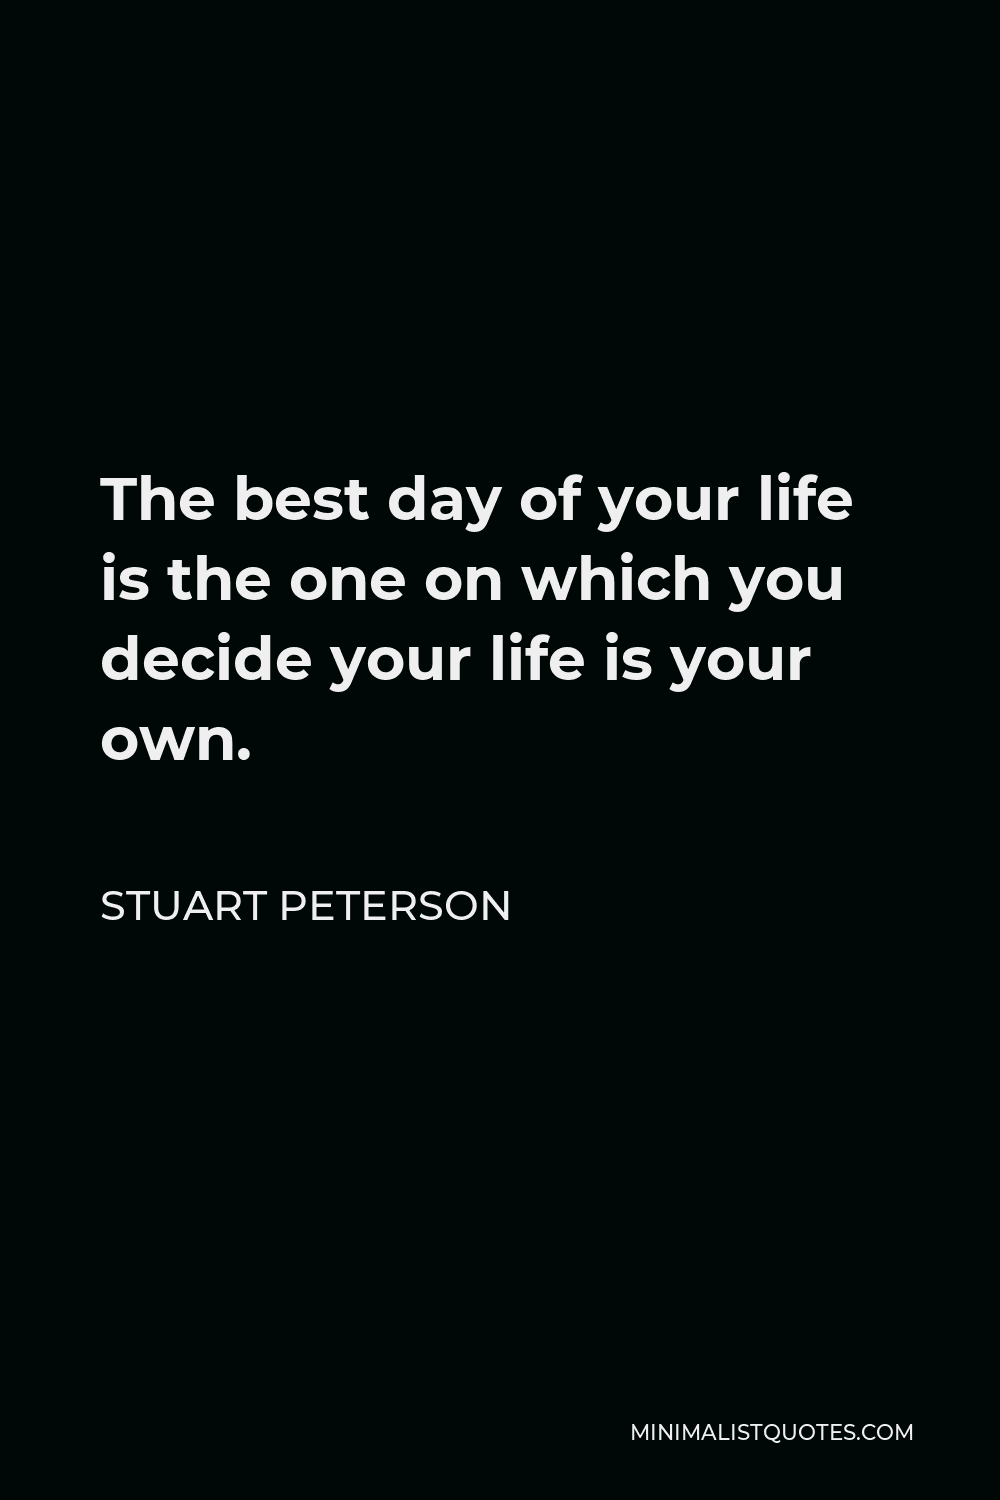 Stuart Peterson Quote - The best day of your life is the one on which you decide your life is your own.